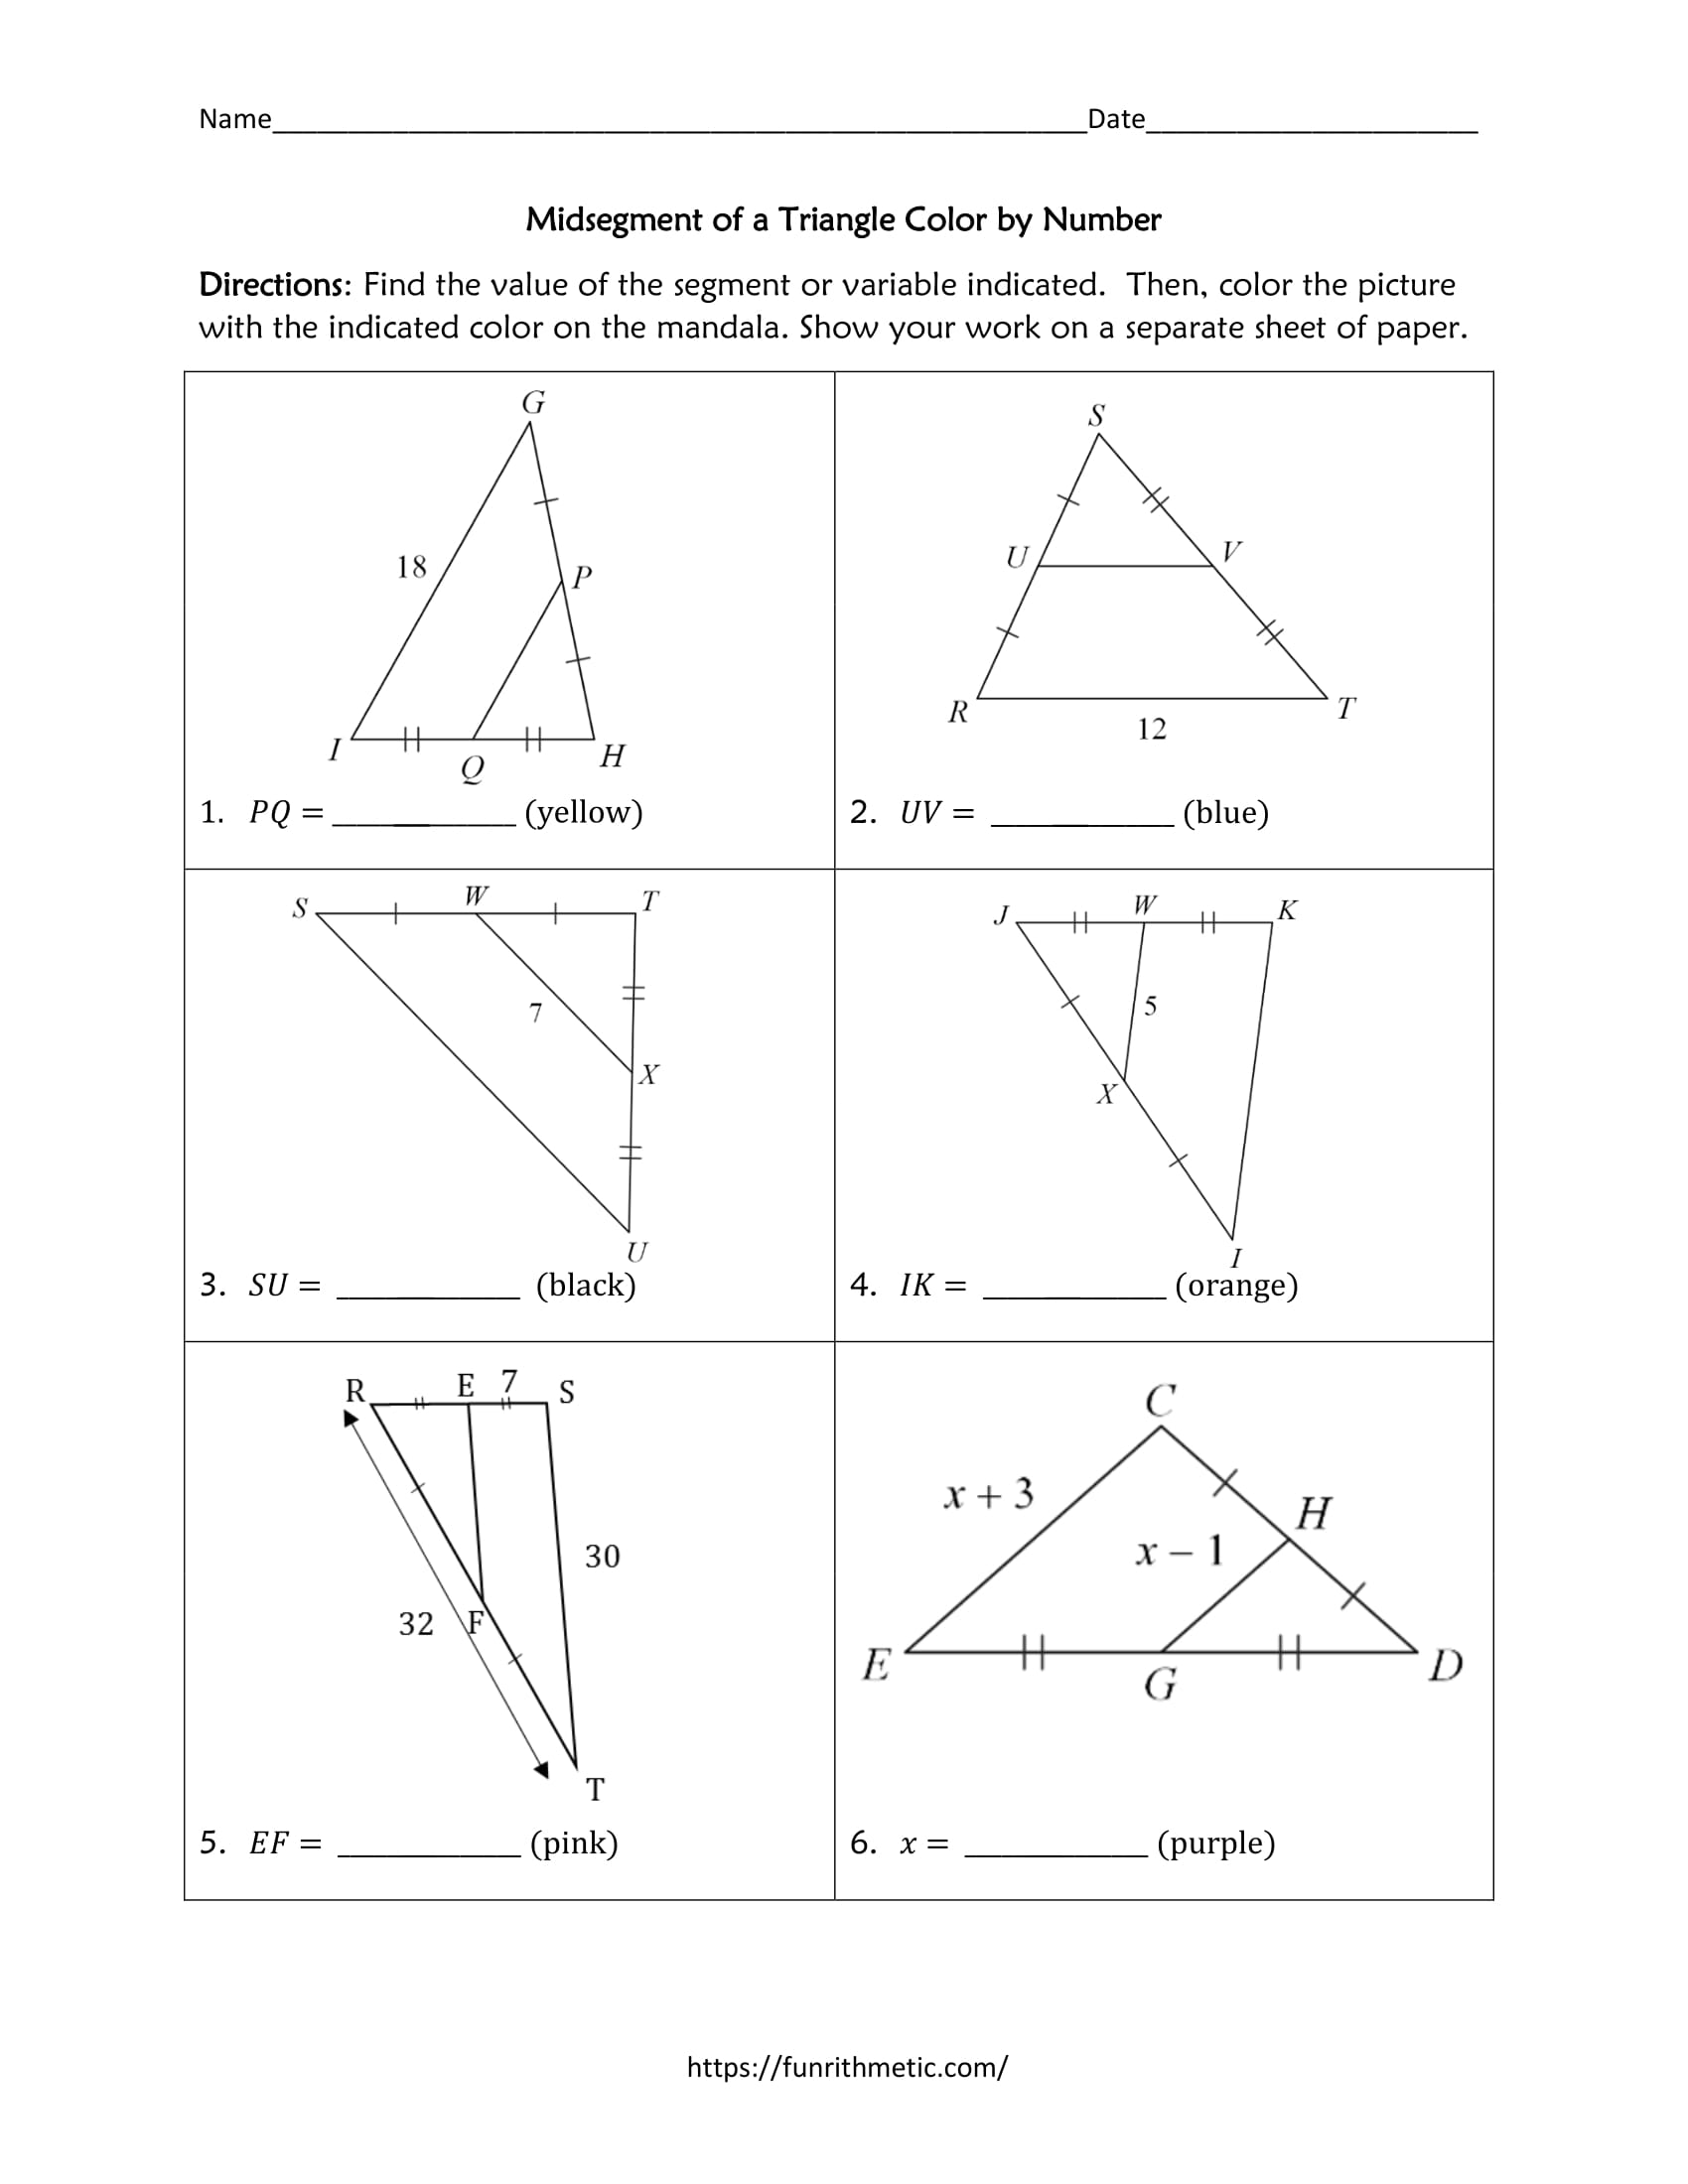 Midsegment of a Triangle Color by Number Inside Midsegment Theorem Worksheet Answer Key